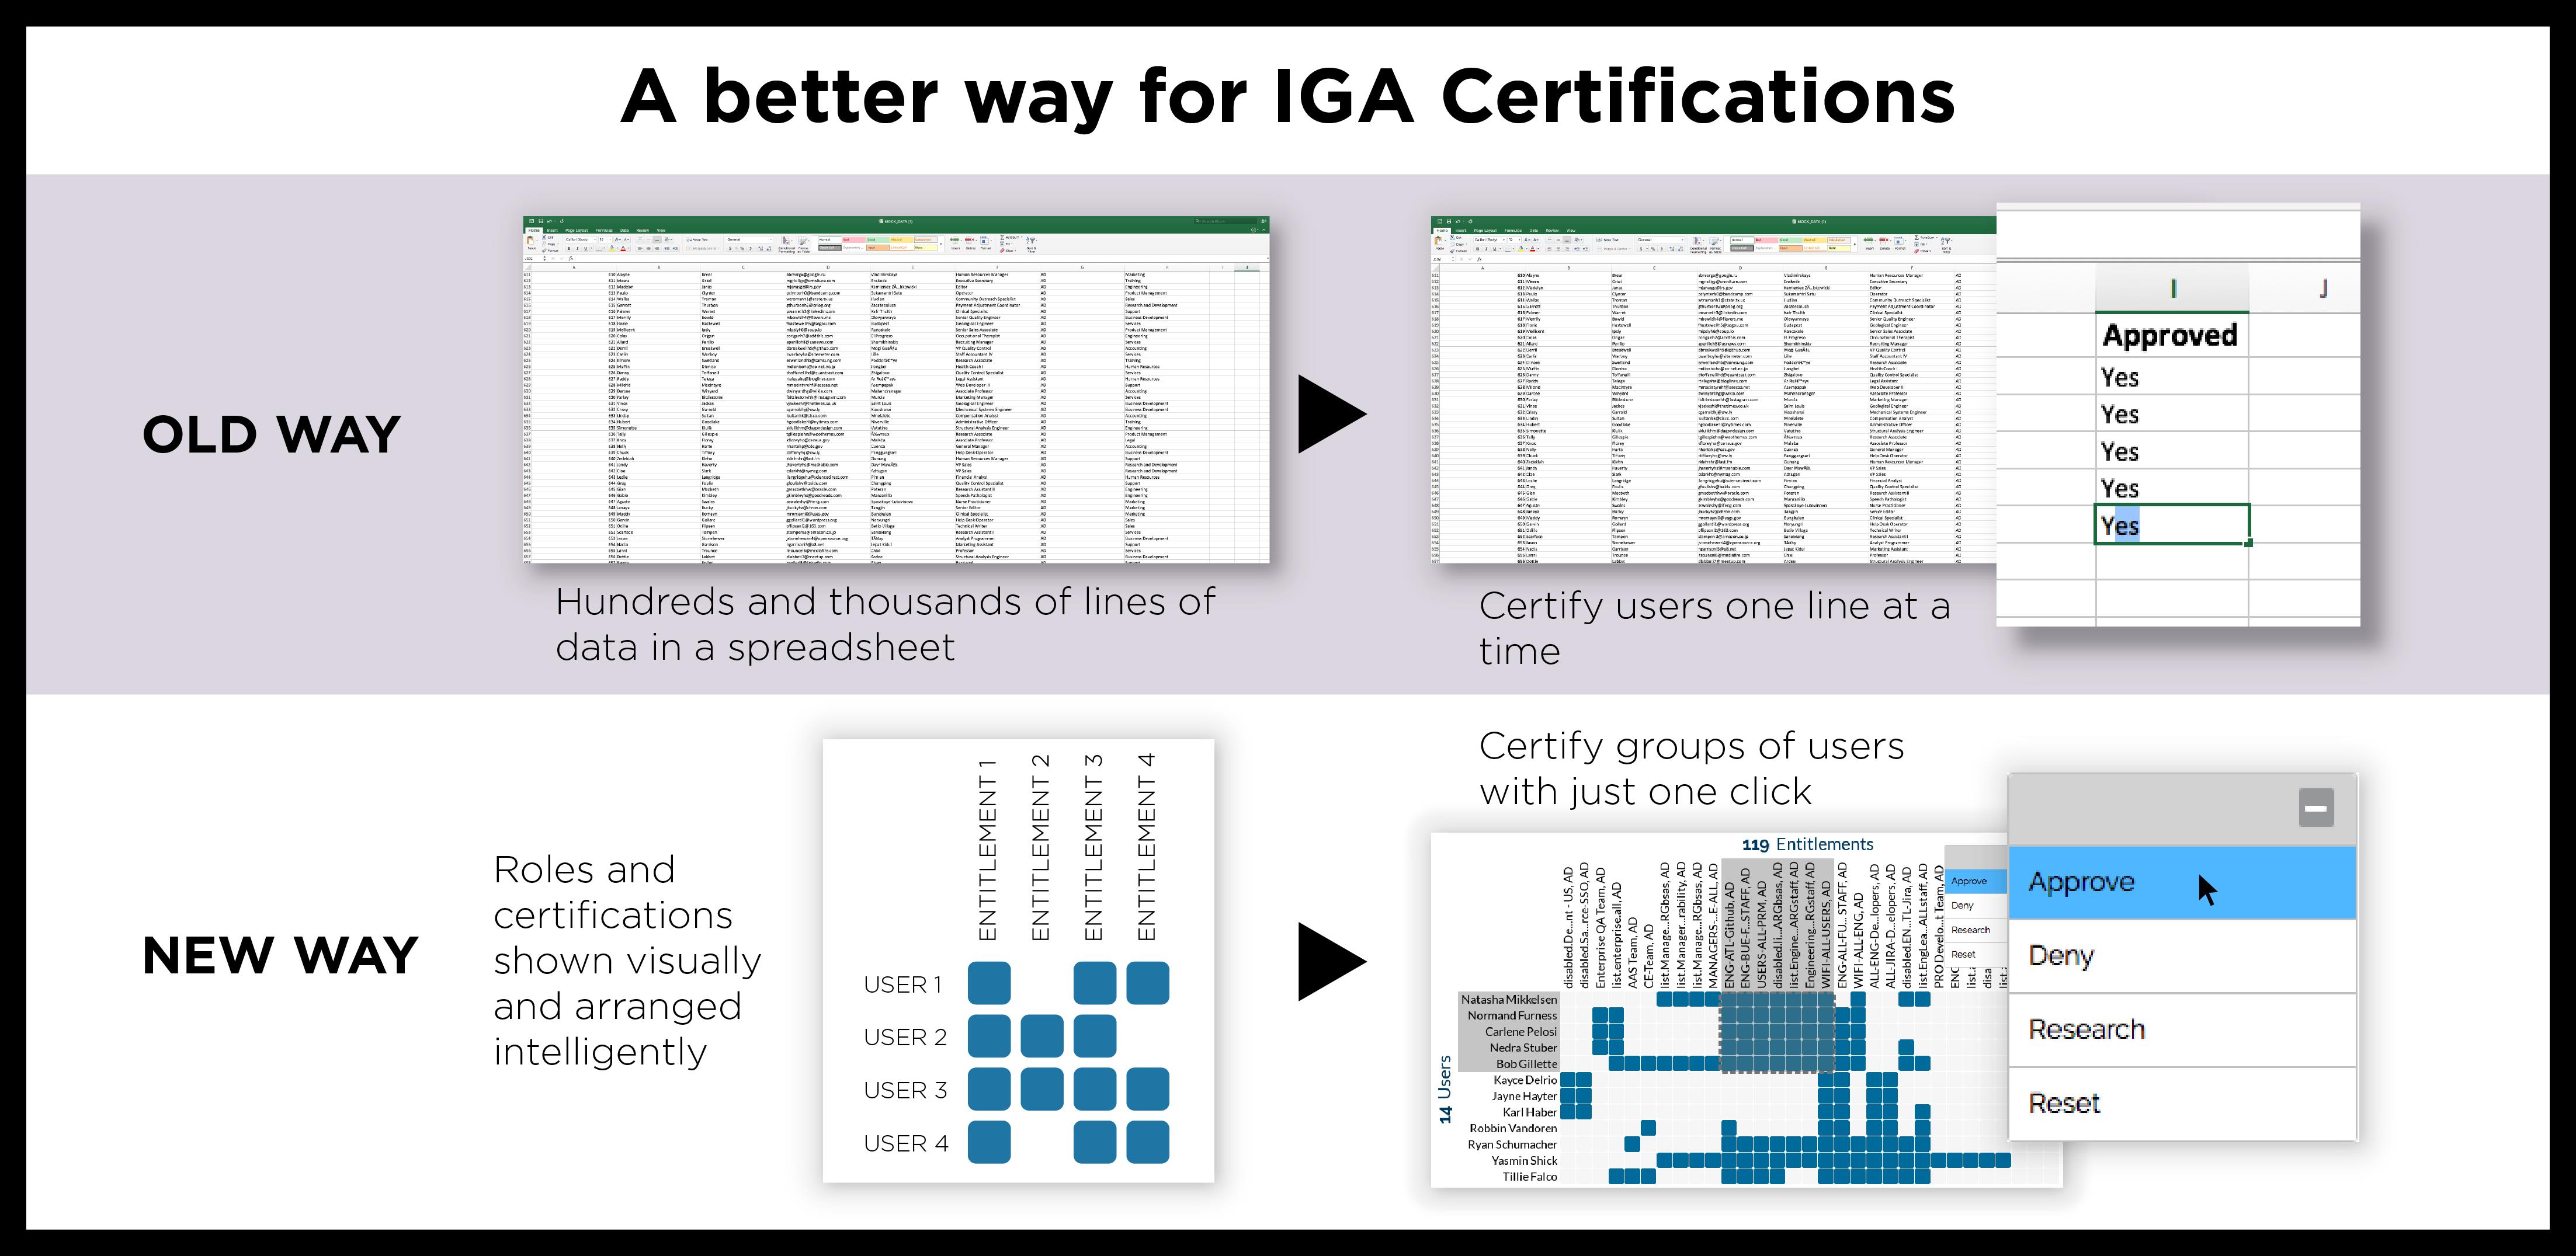 A Better Way for IGA Certifications